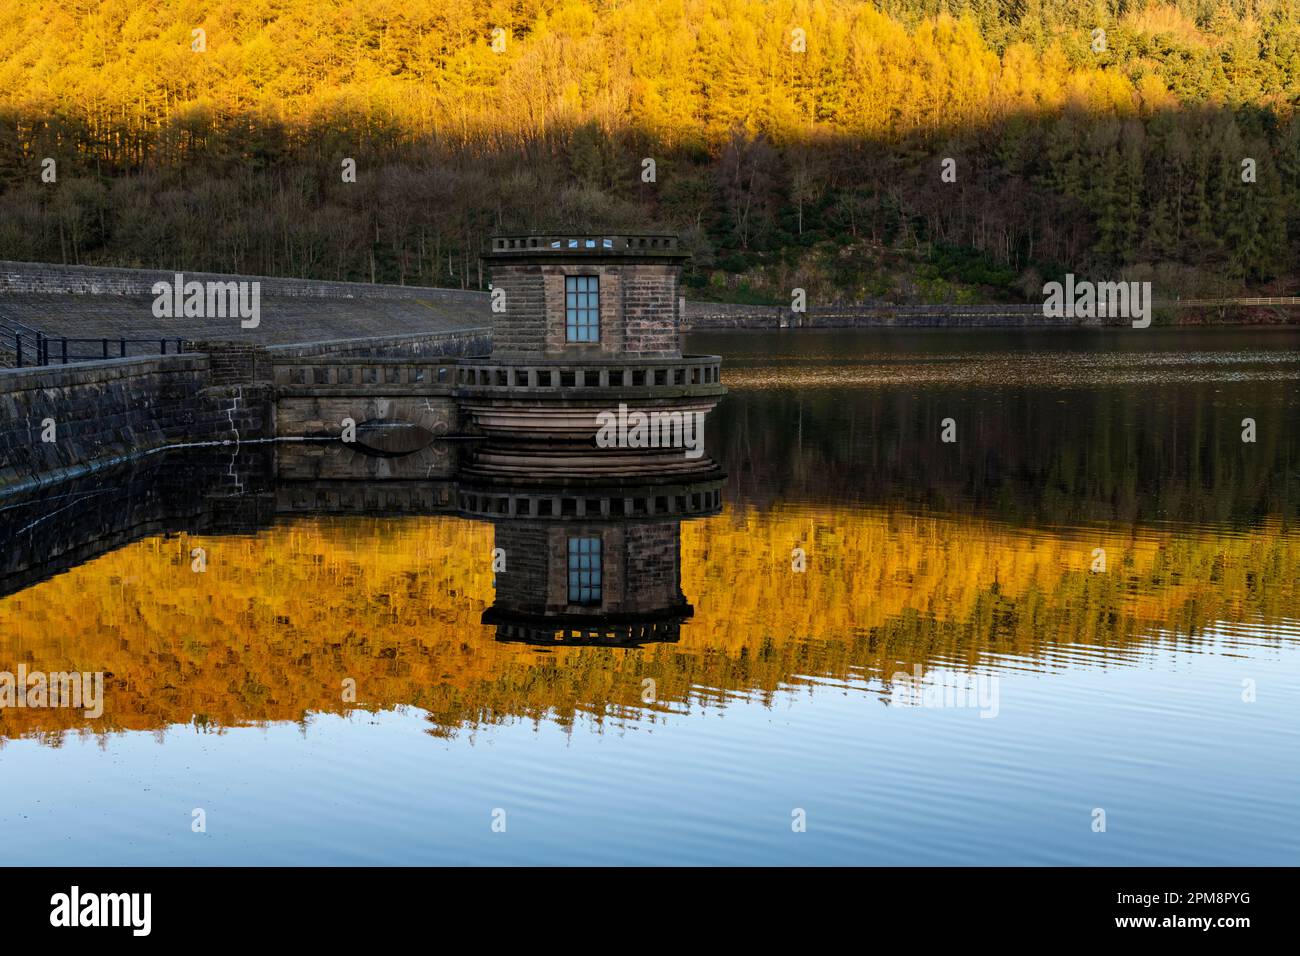 Draw off tower at Ladybower reservoir in the Peak District national park, Derbyshire, England. Stock Photo